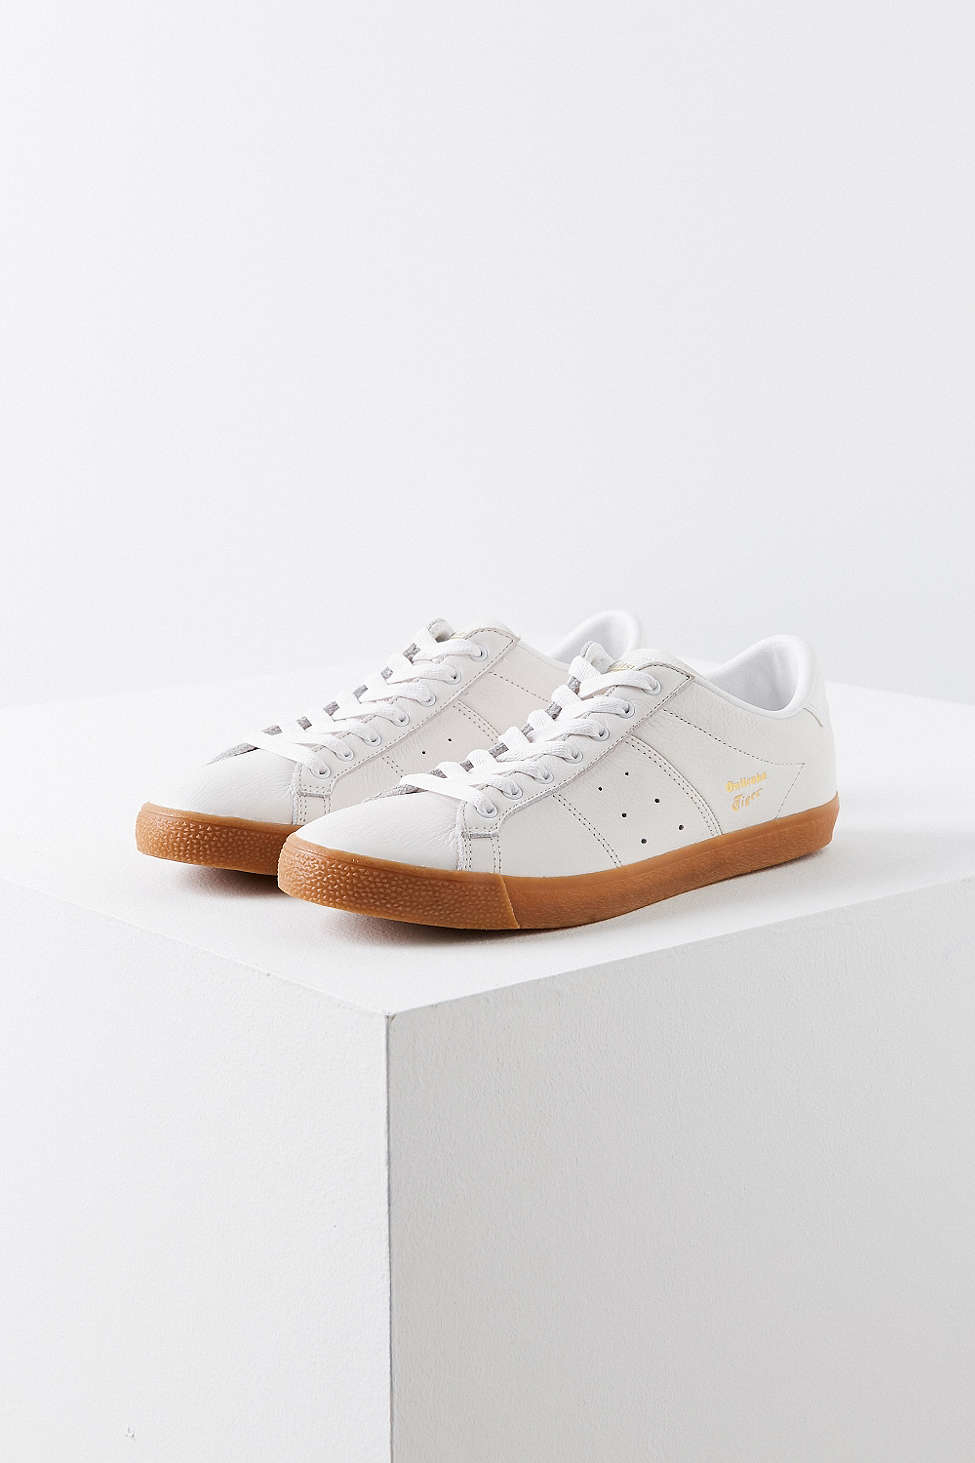 Asics Onitsuka Tiger Lawnship Gum Sole Sneaker in White | Lyst